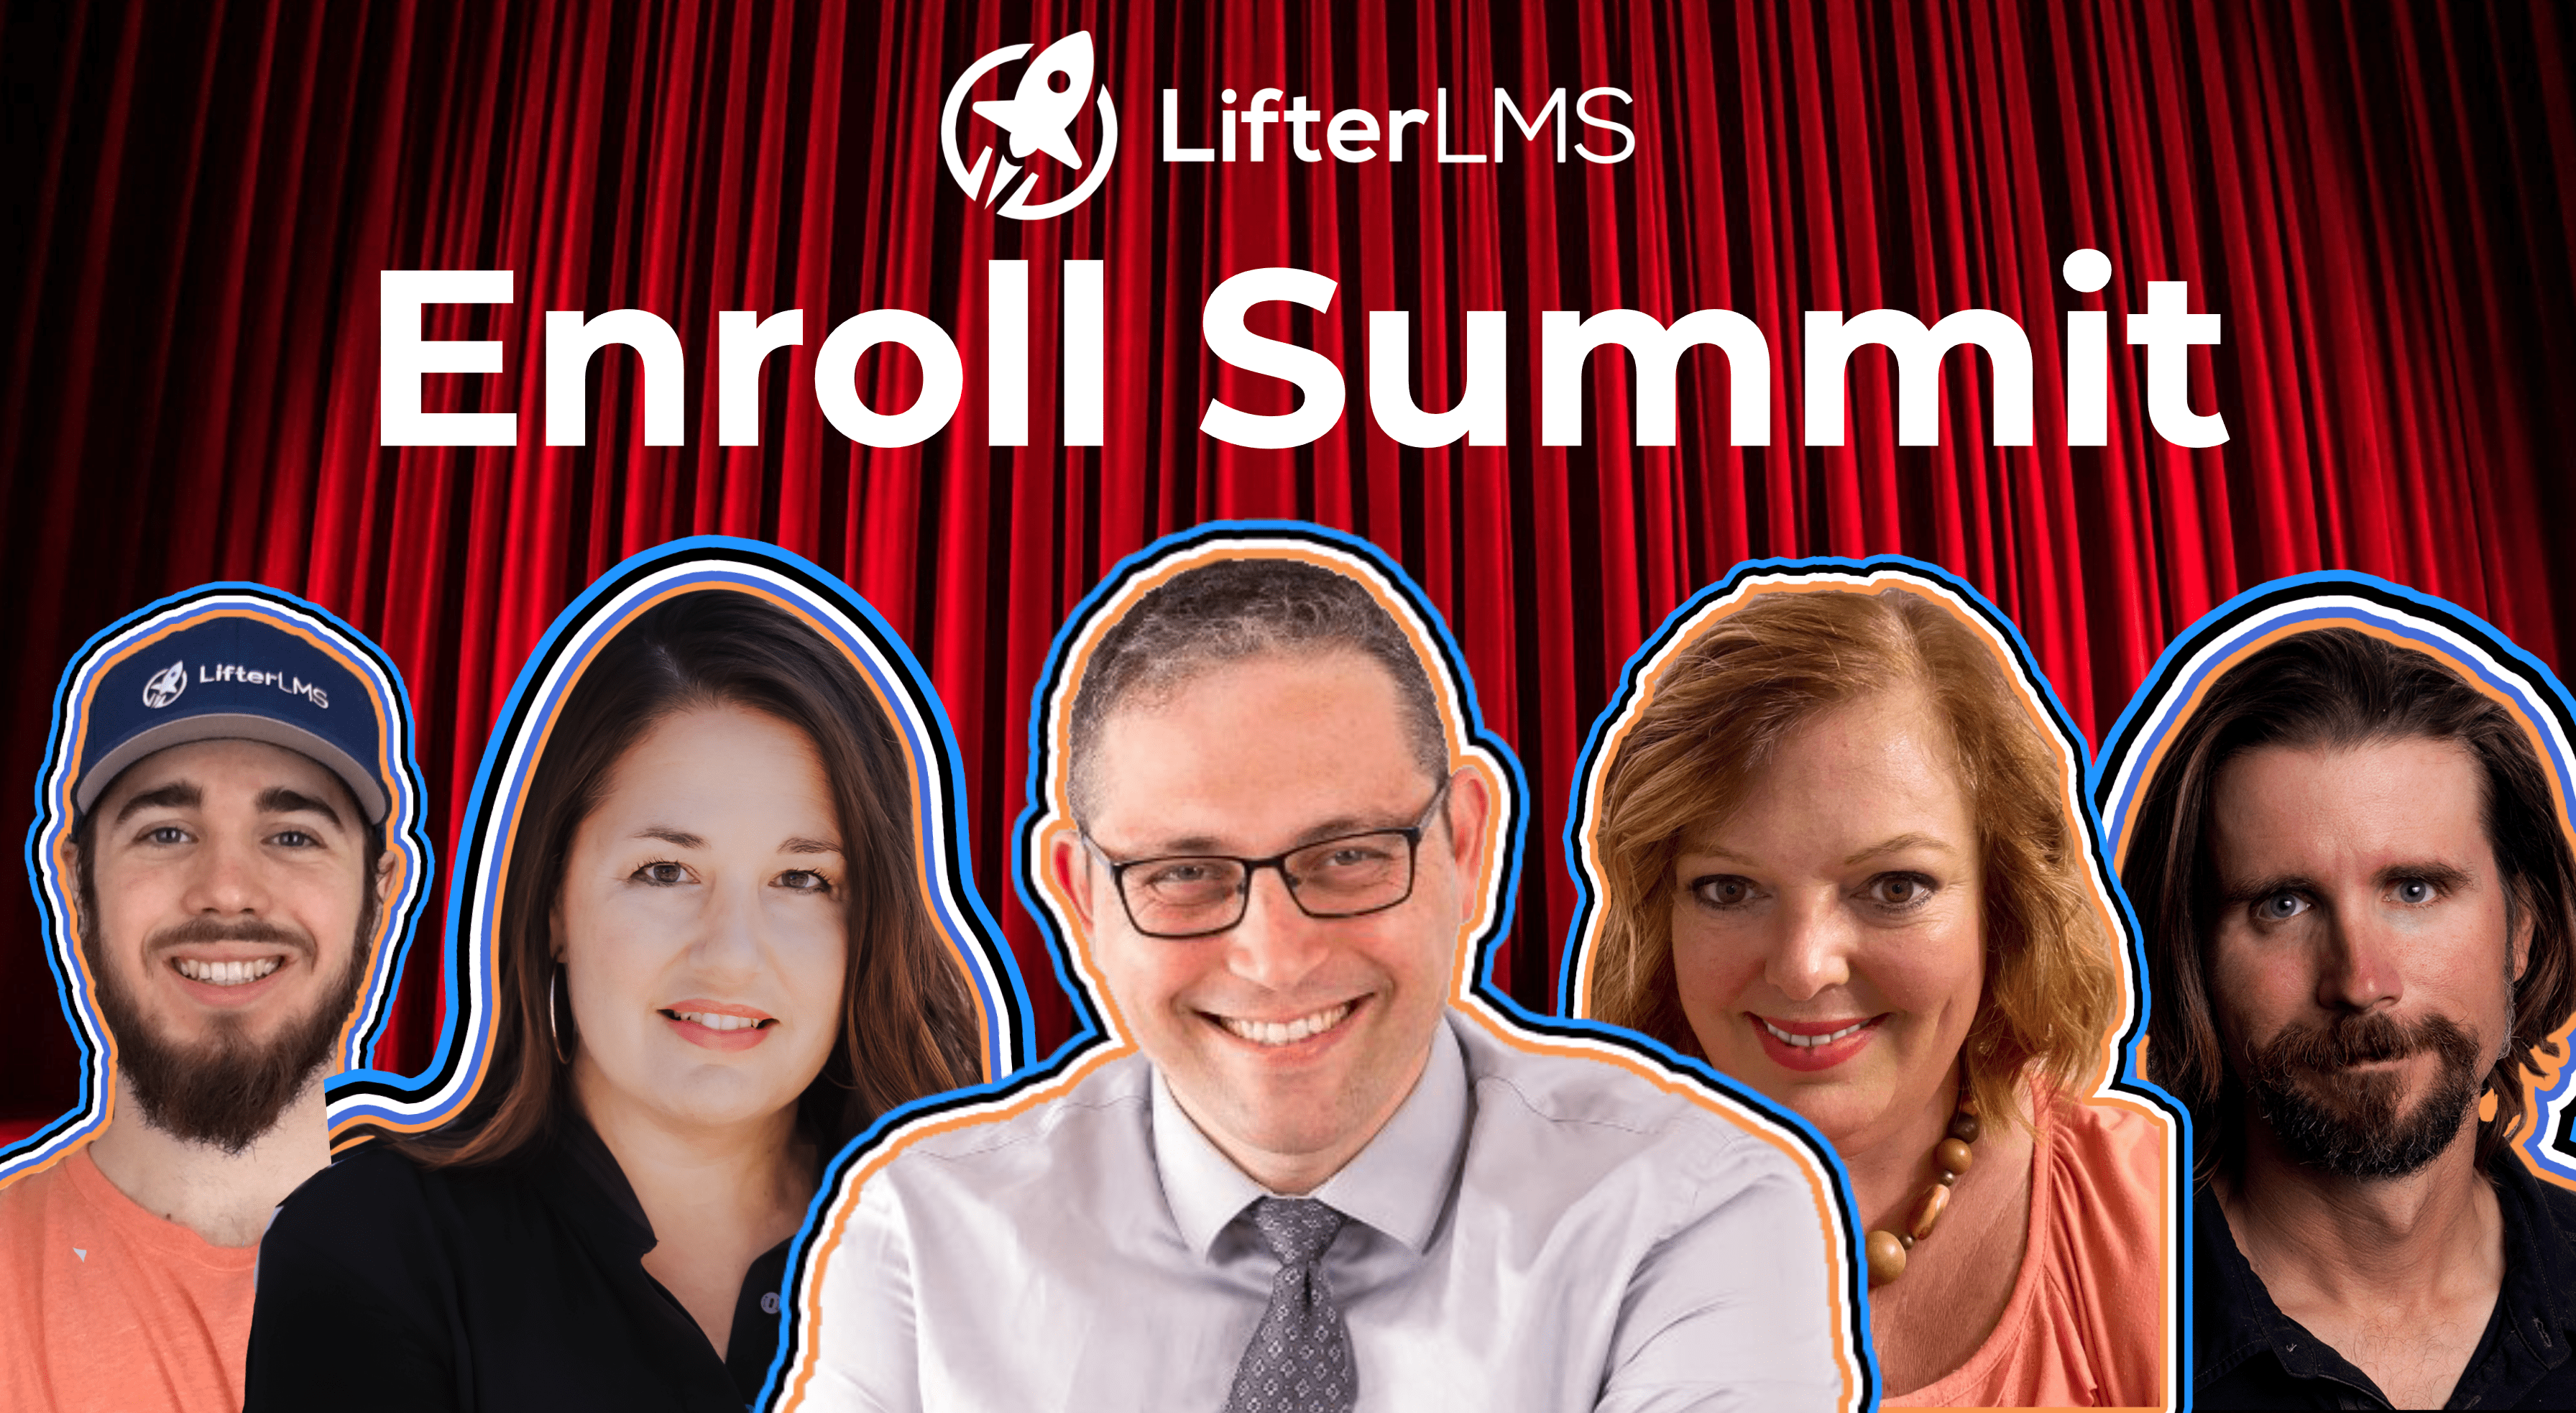 Enroll Summit – Getting Your First 10 Enrollments (0 to 10)